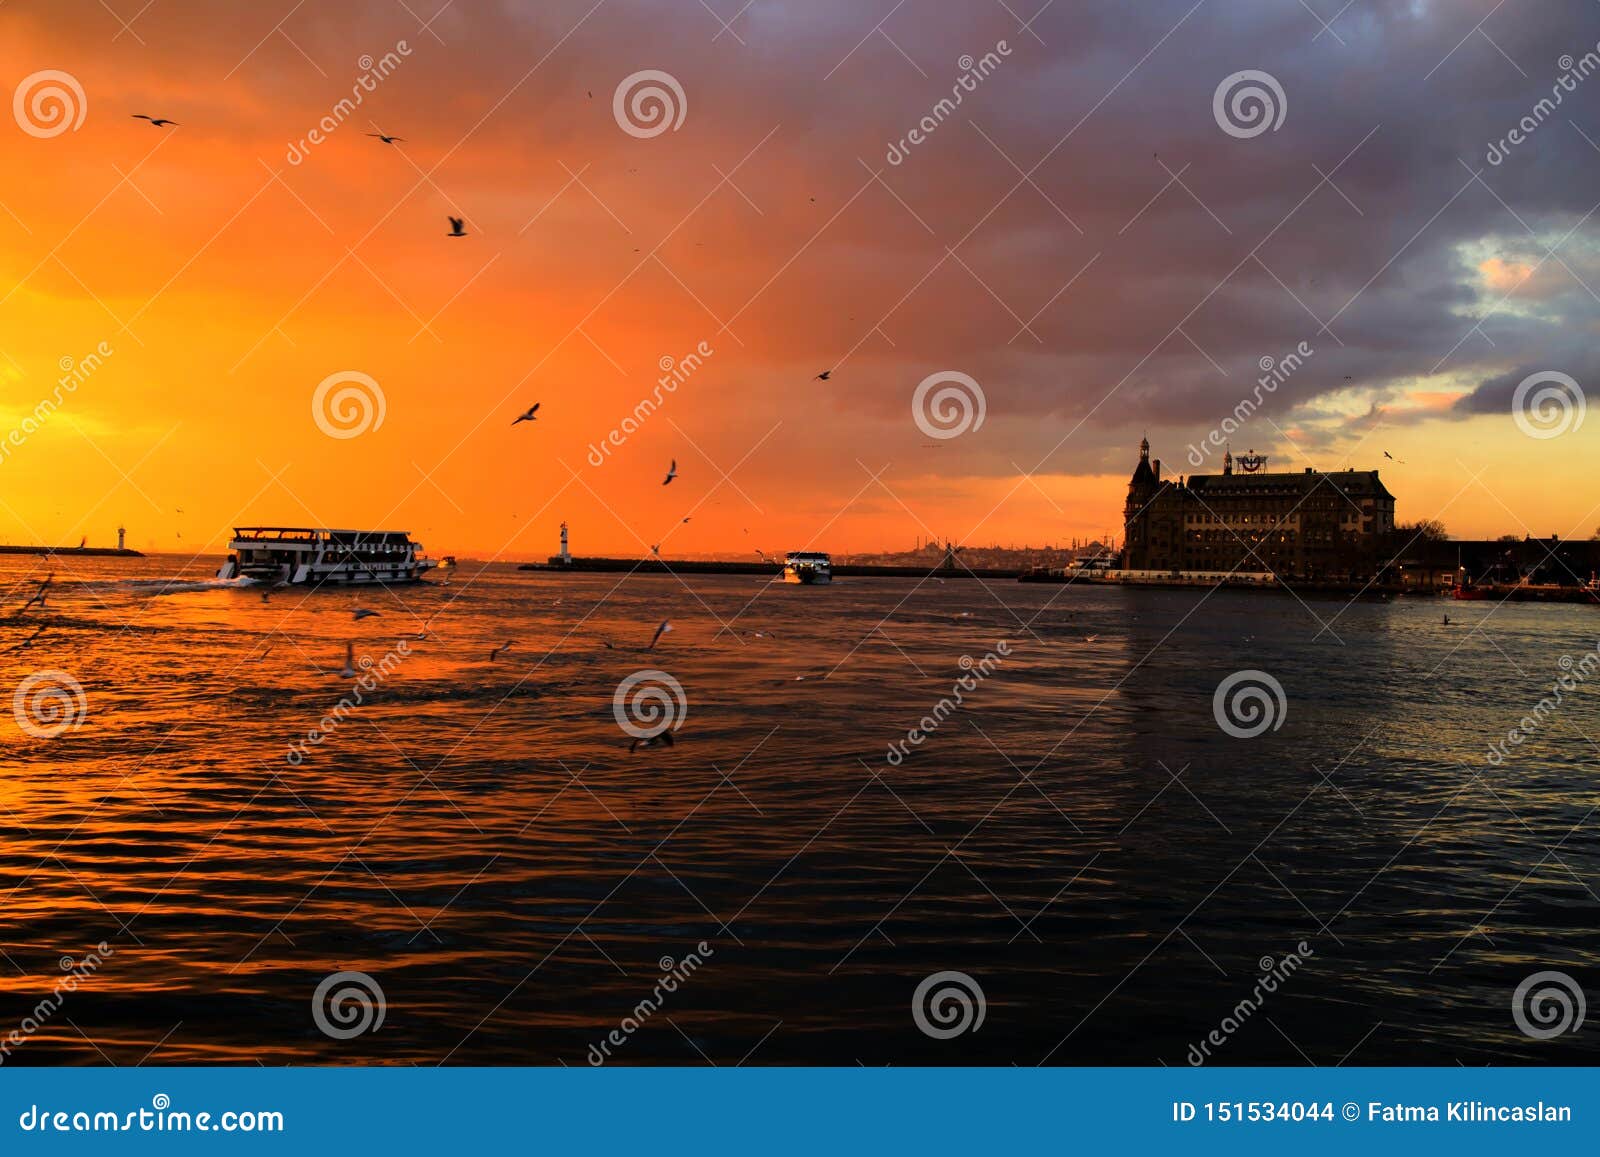 istanbul haydarpasa railway station and view of ferry at sunset